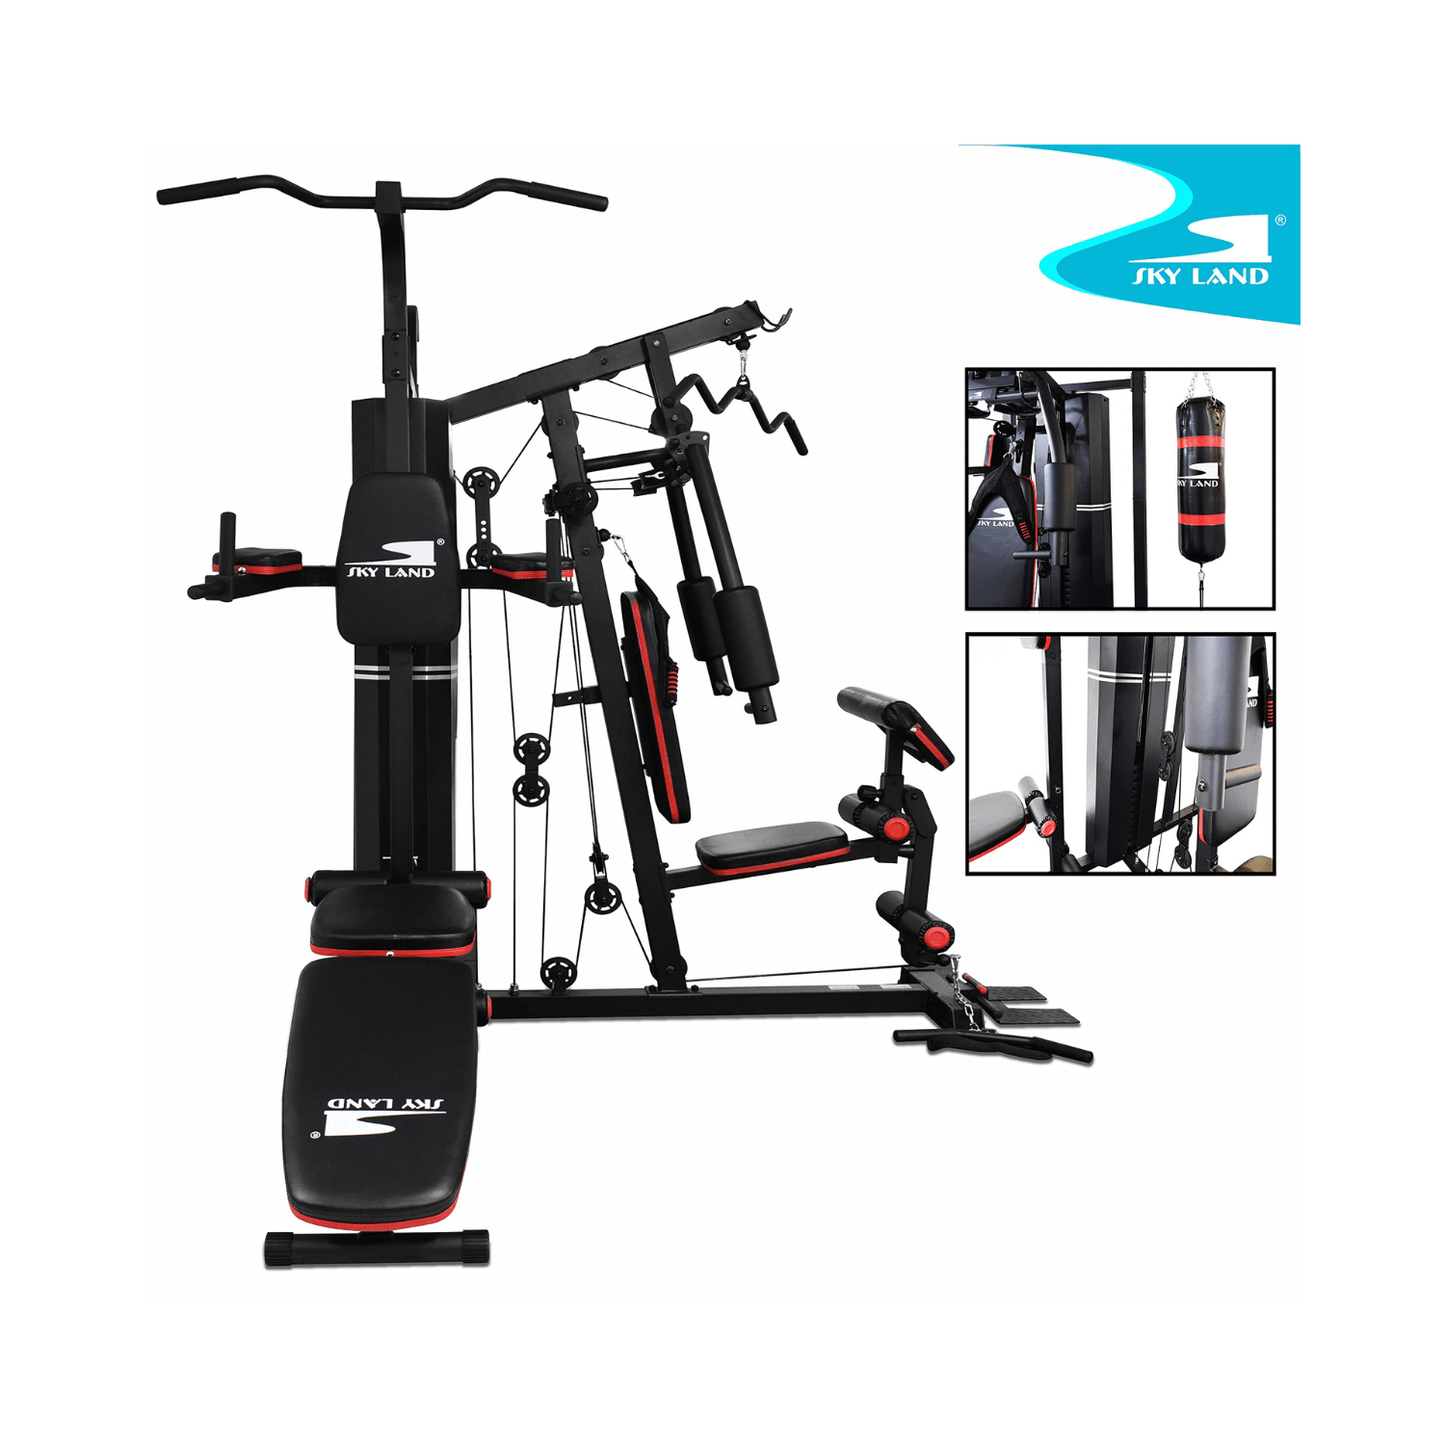 3 Station Multifunctional Home Gym GM-8138 SKY LAND - COOLBABY